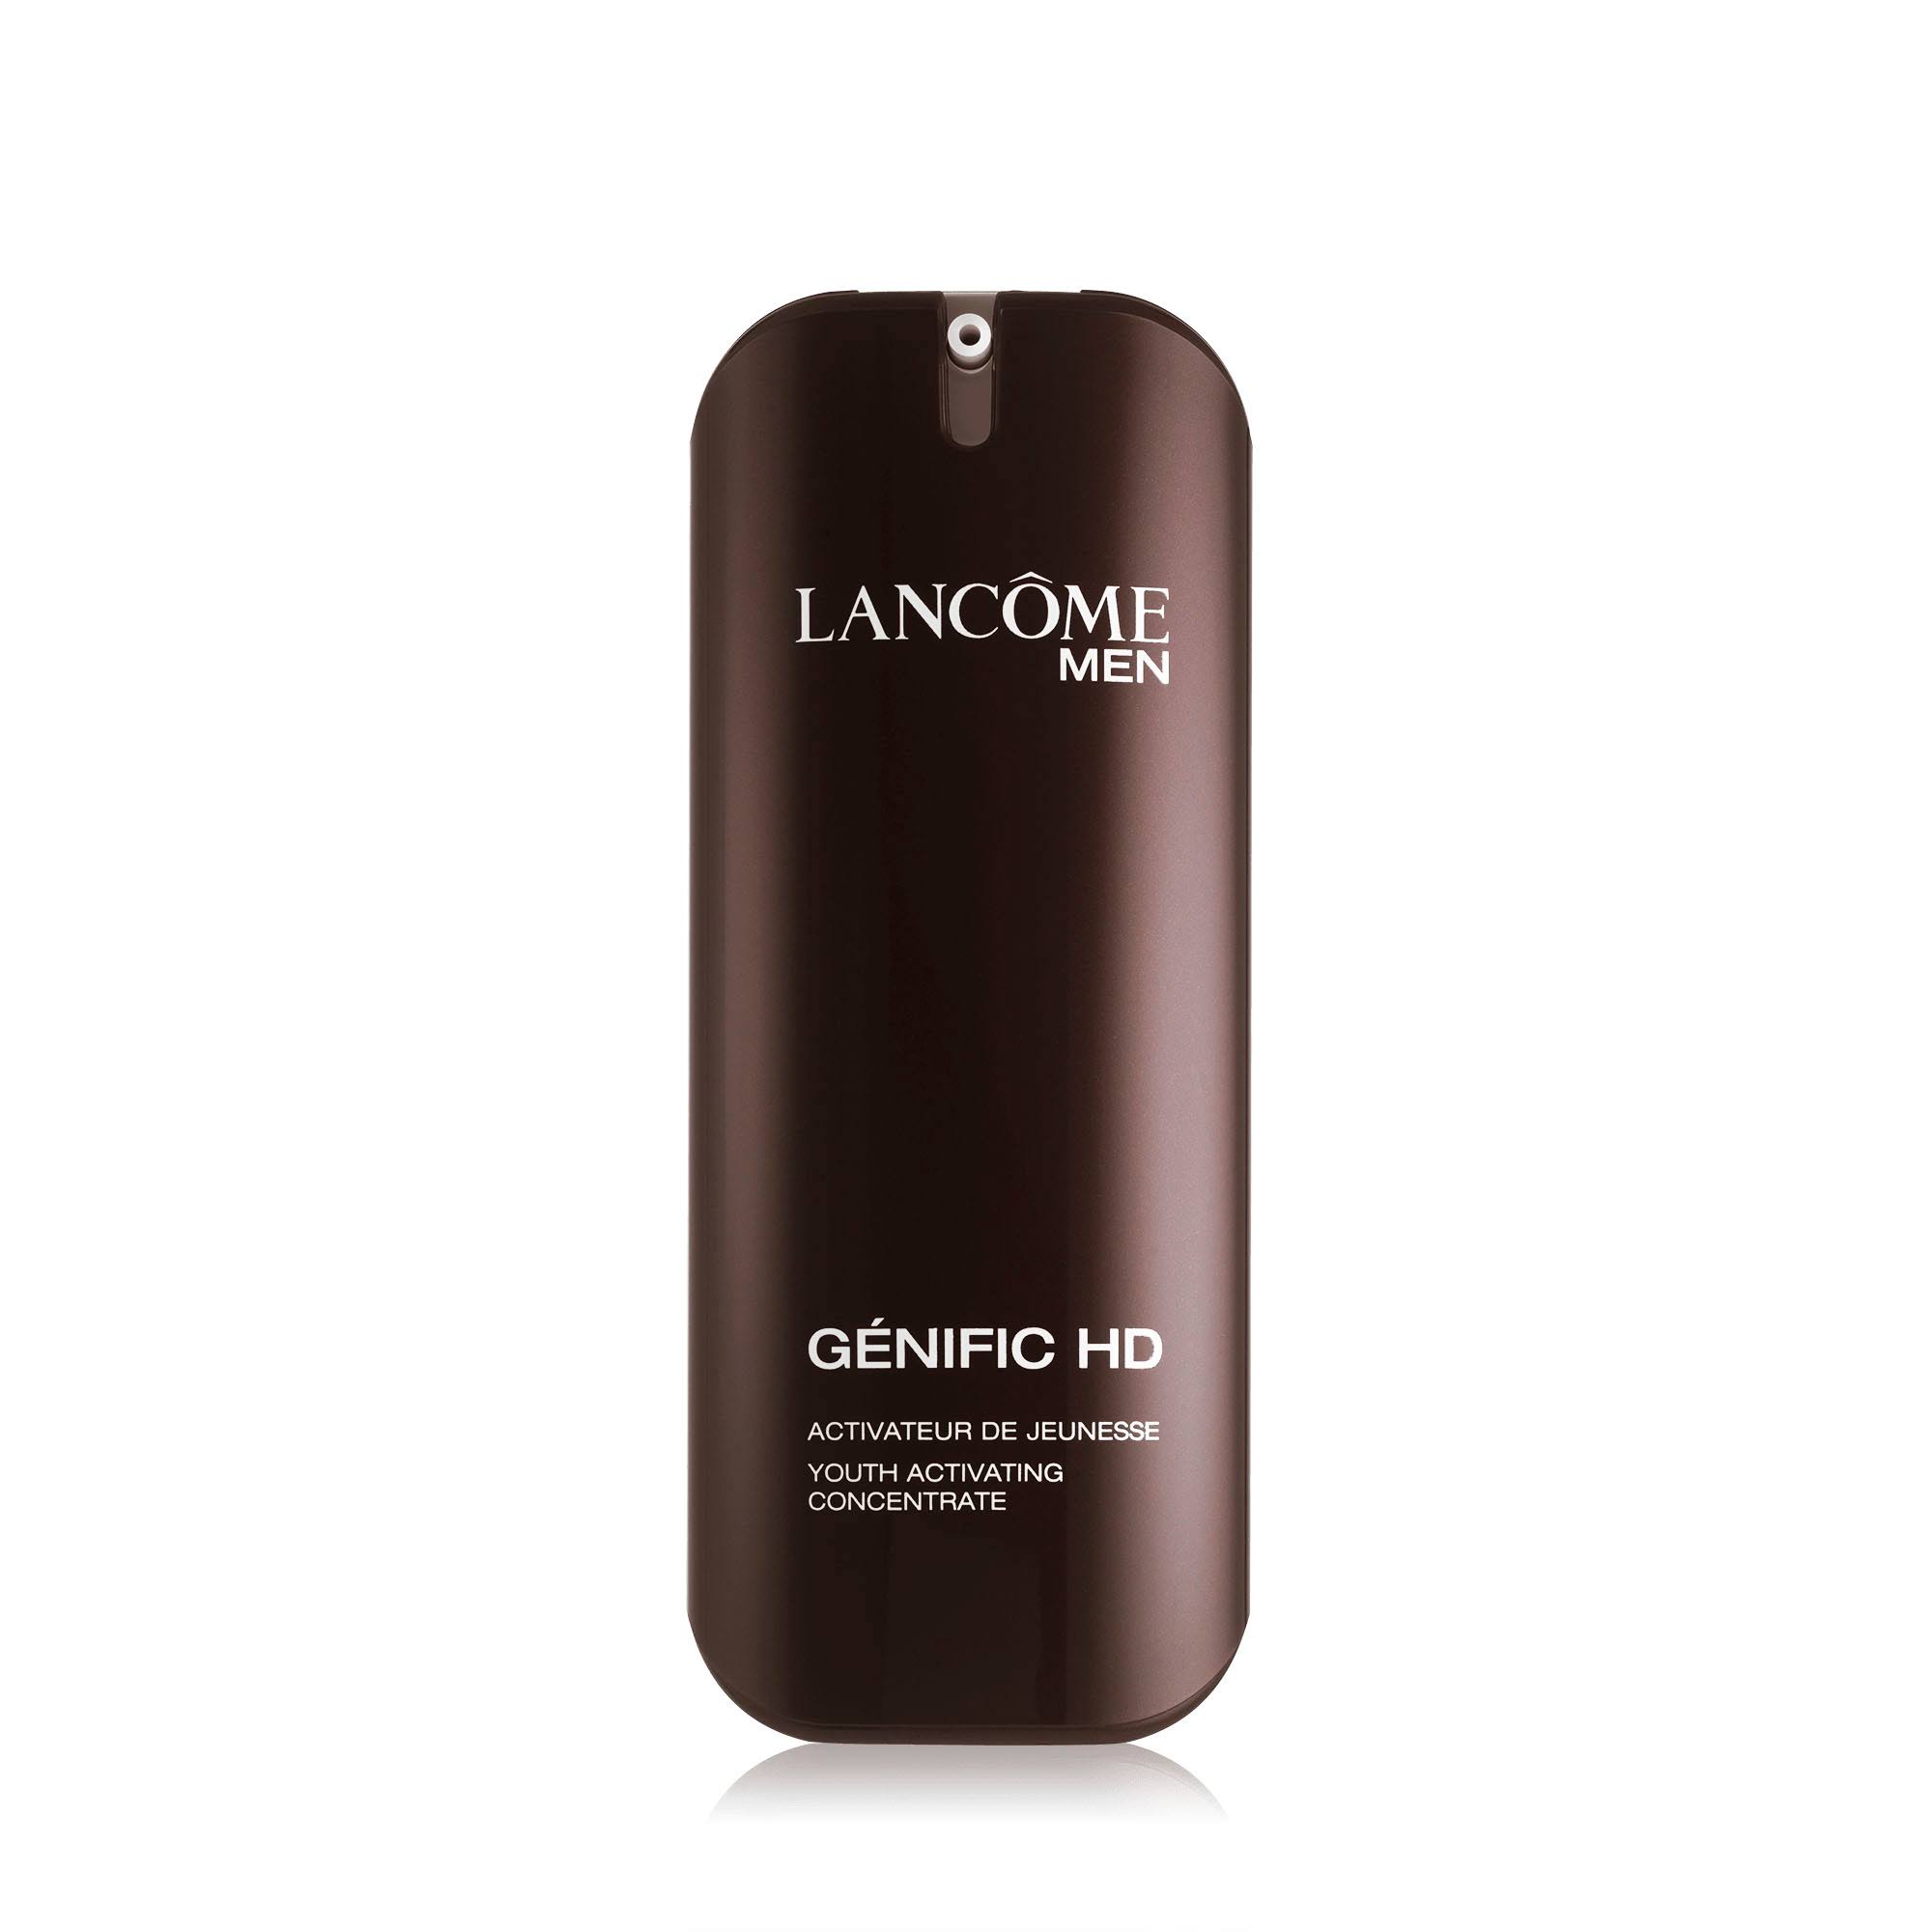 Lancome Genific HD for Men Youth Activating Concentrate - 50ml